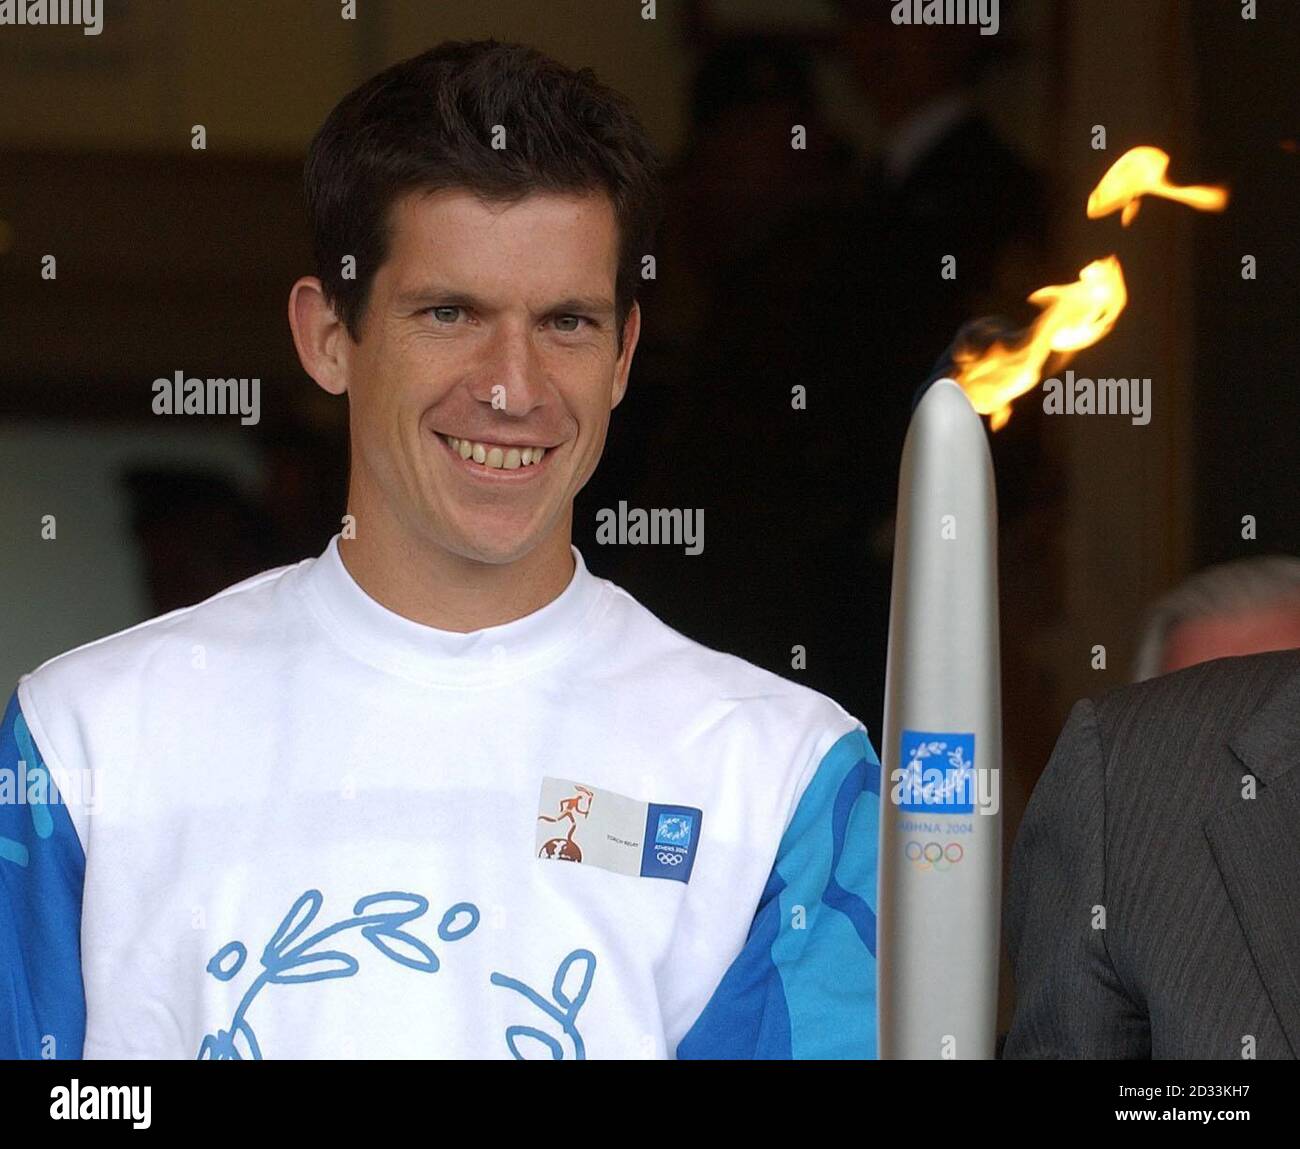 Tim Henman holds the Olympic torch after receiving it from Sir Roger Bannister outside the Centre Court at the Lawn Tennis Championships in Wimbledon. Henman later passed the flame to former champion Virginia Wade for the journey into central London. Stock Photo